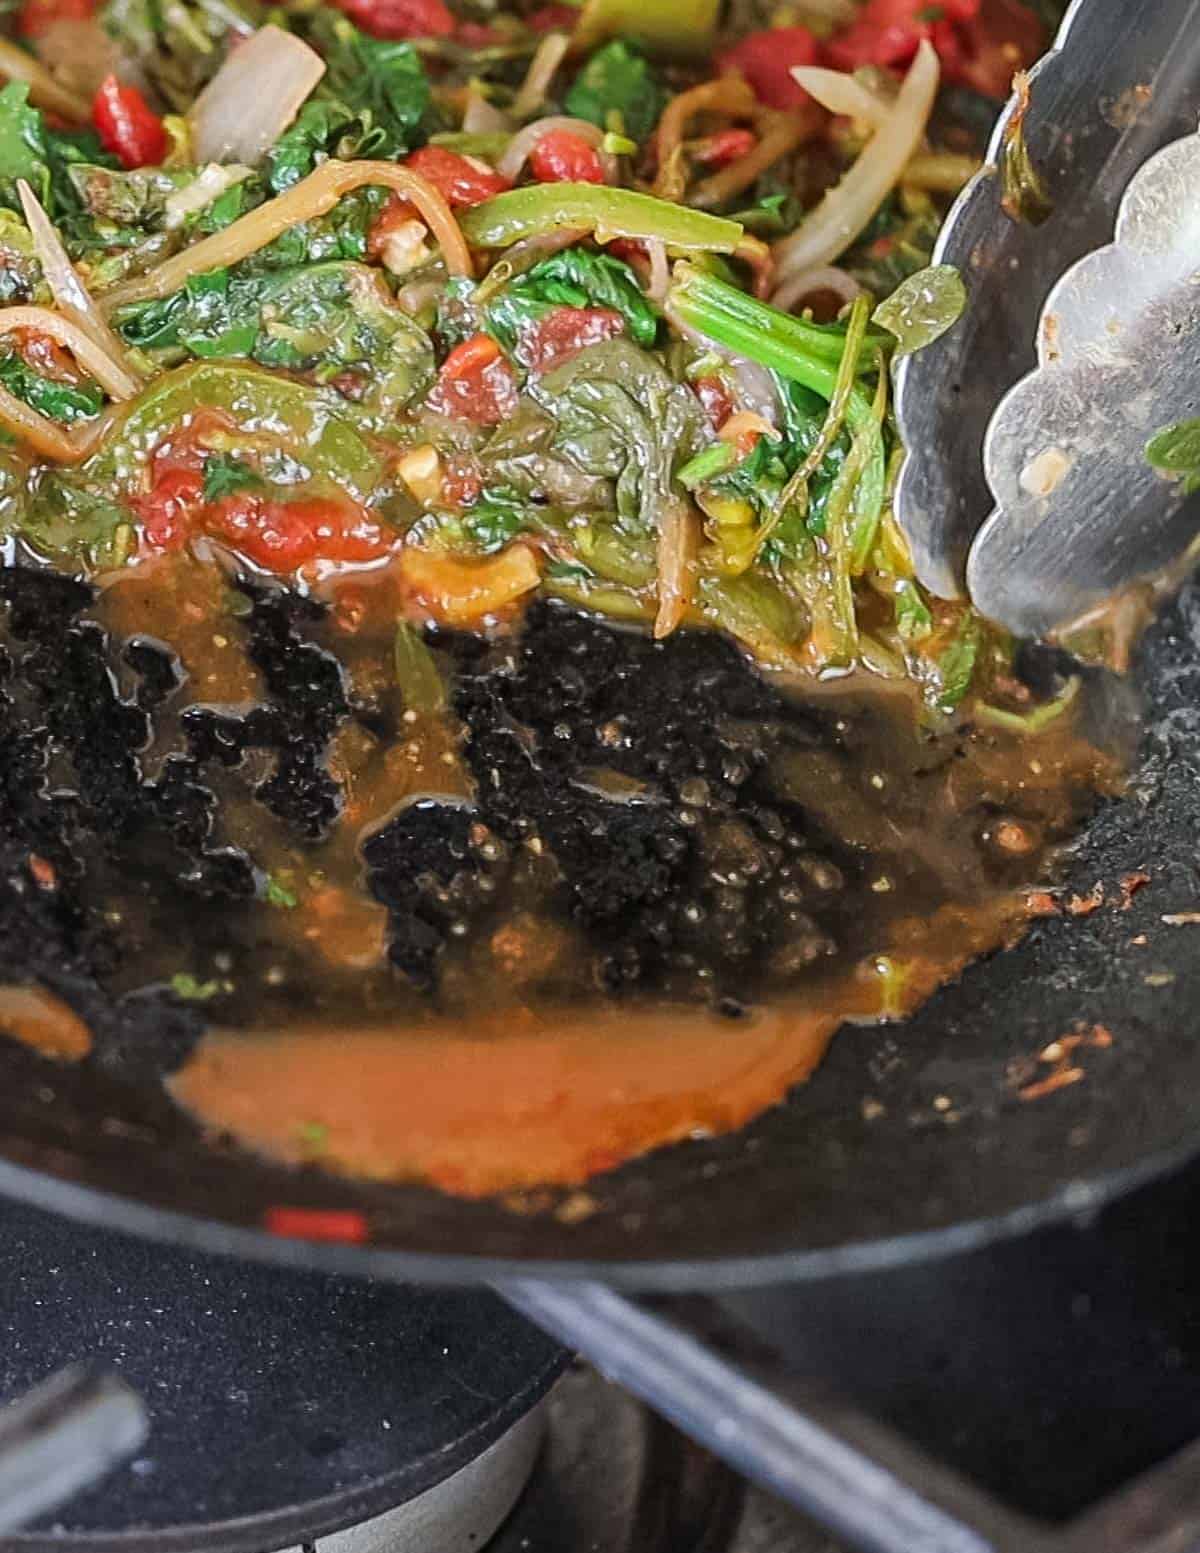 A close up image of a pan of cooked greens showing juices running in the bottom of the pan. 